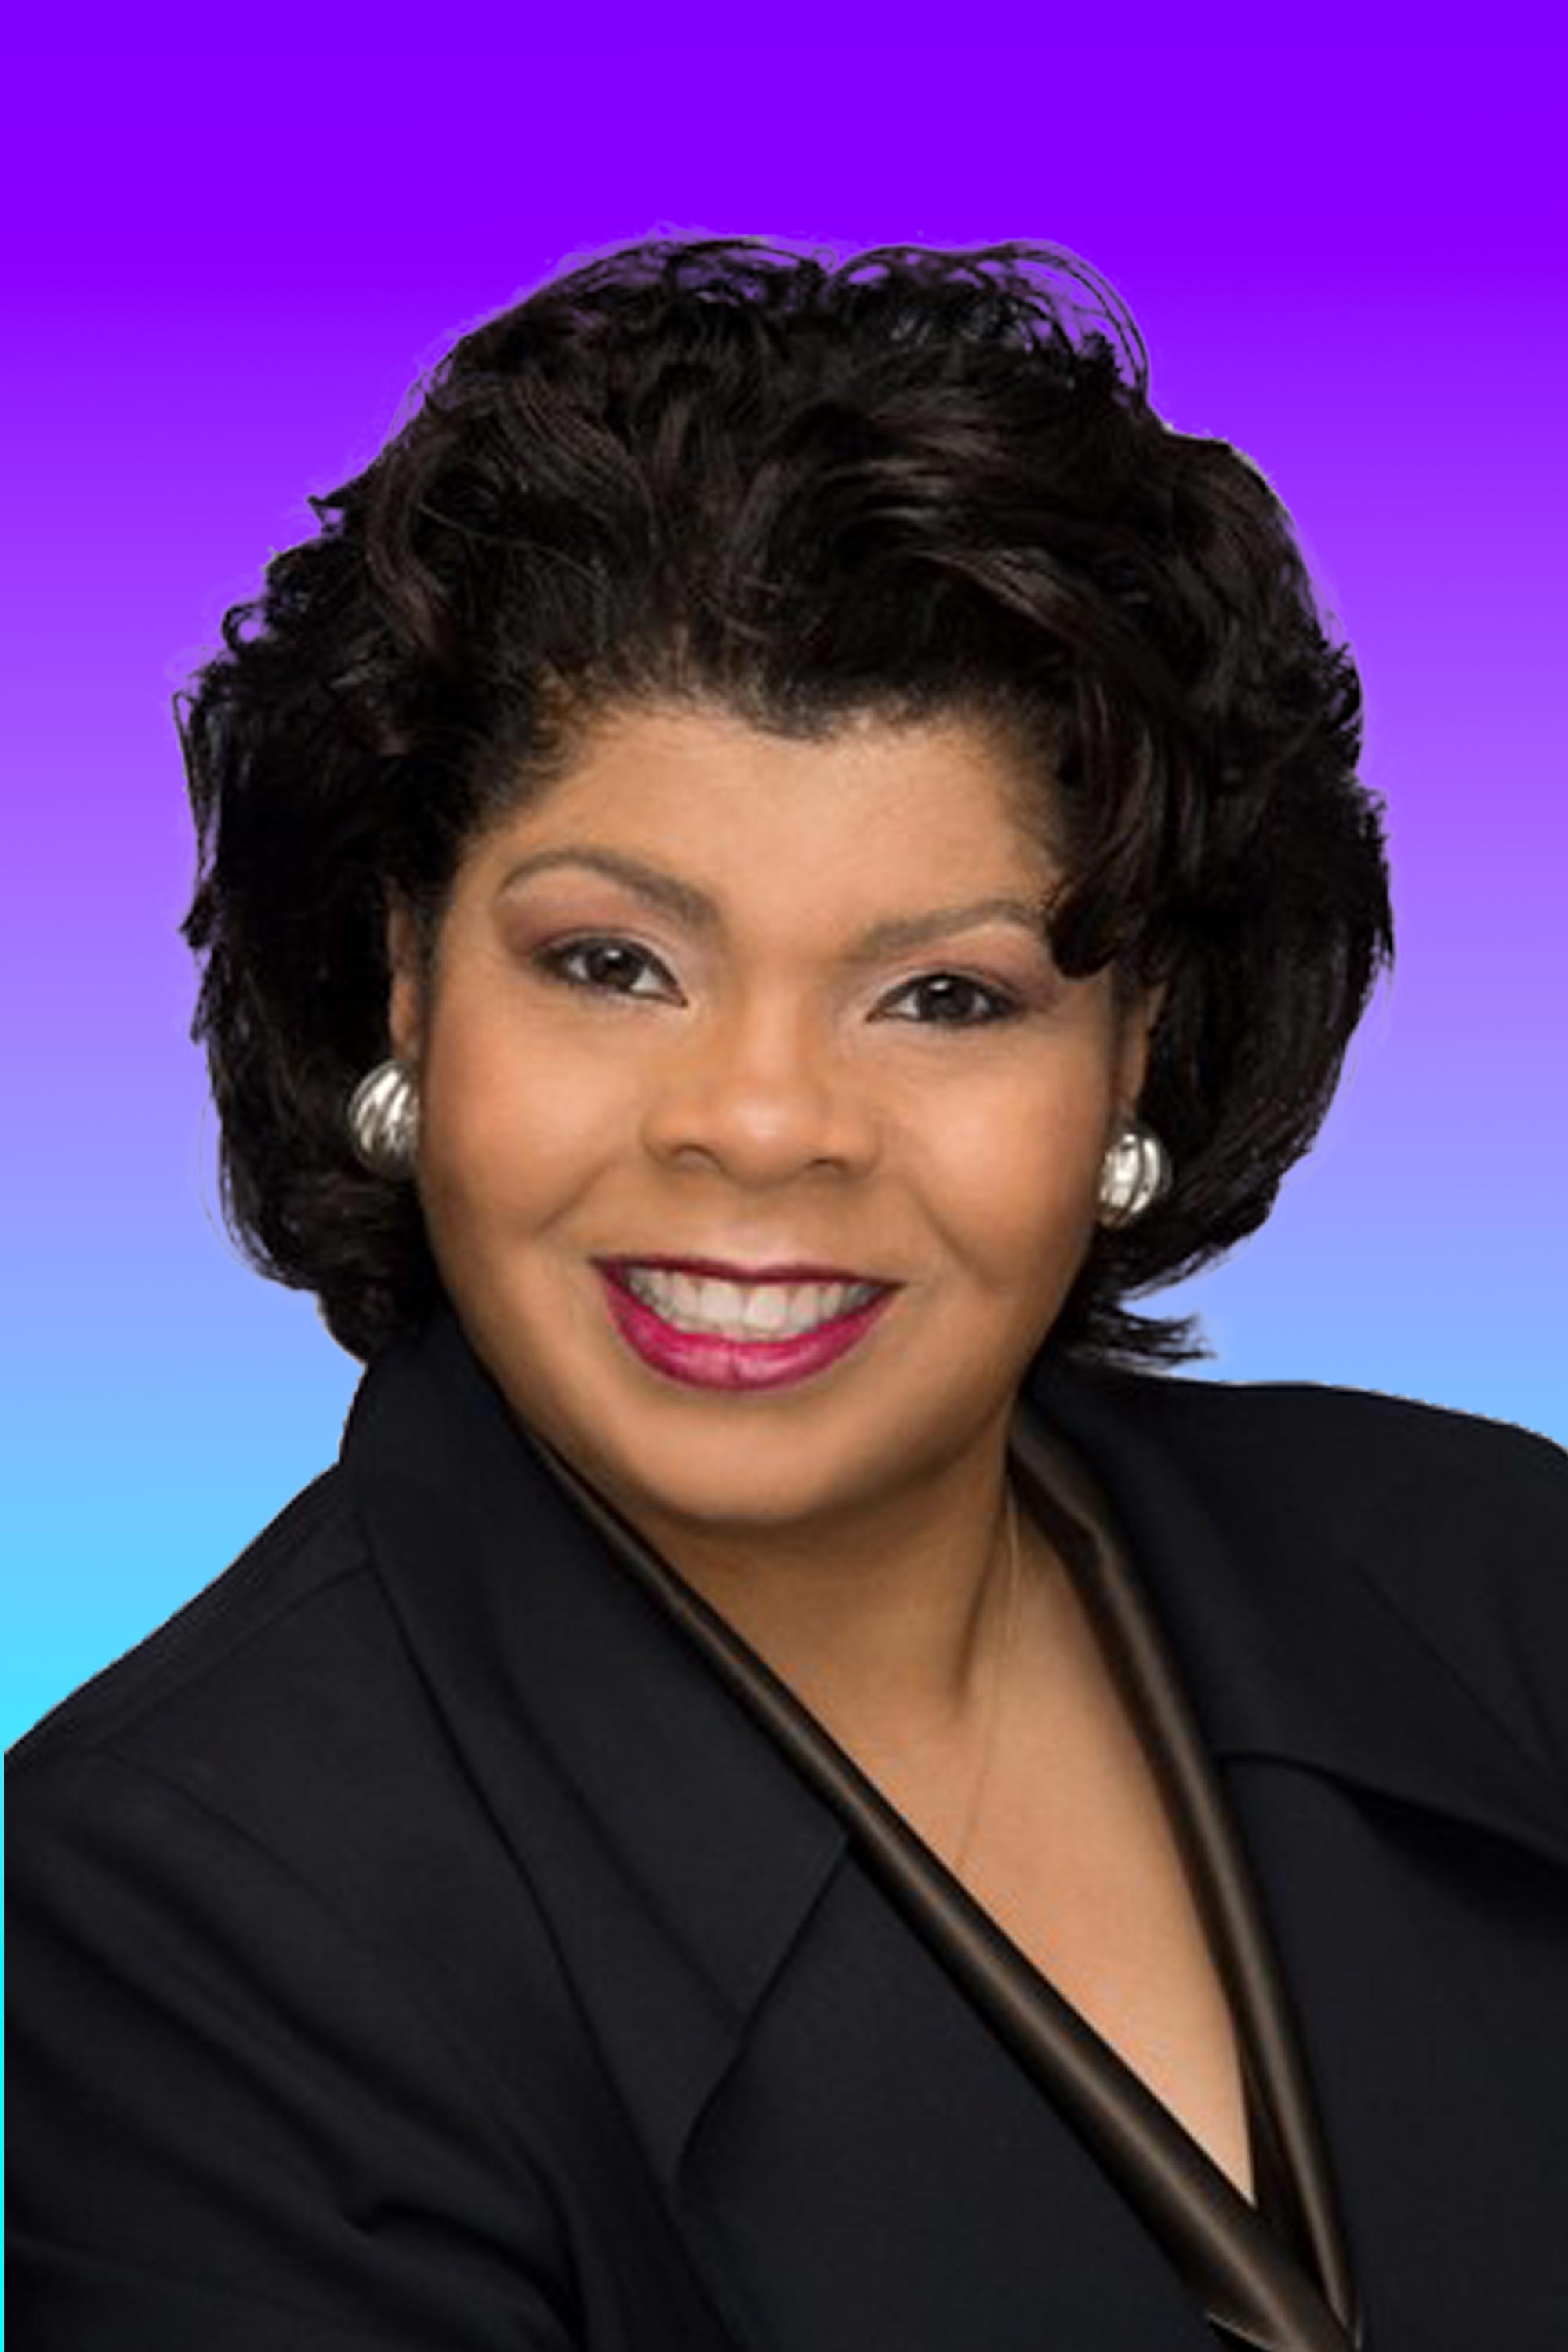 5 Things To Know About Veteran Journalist April Ryan 